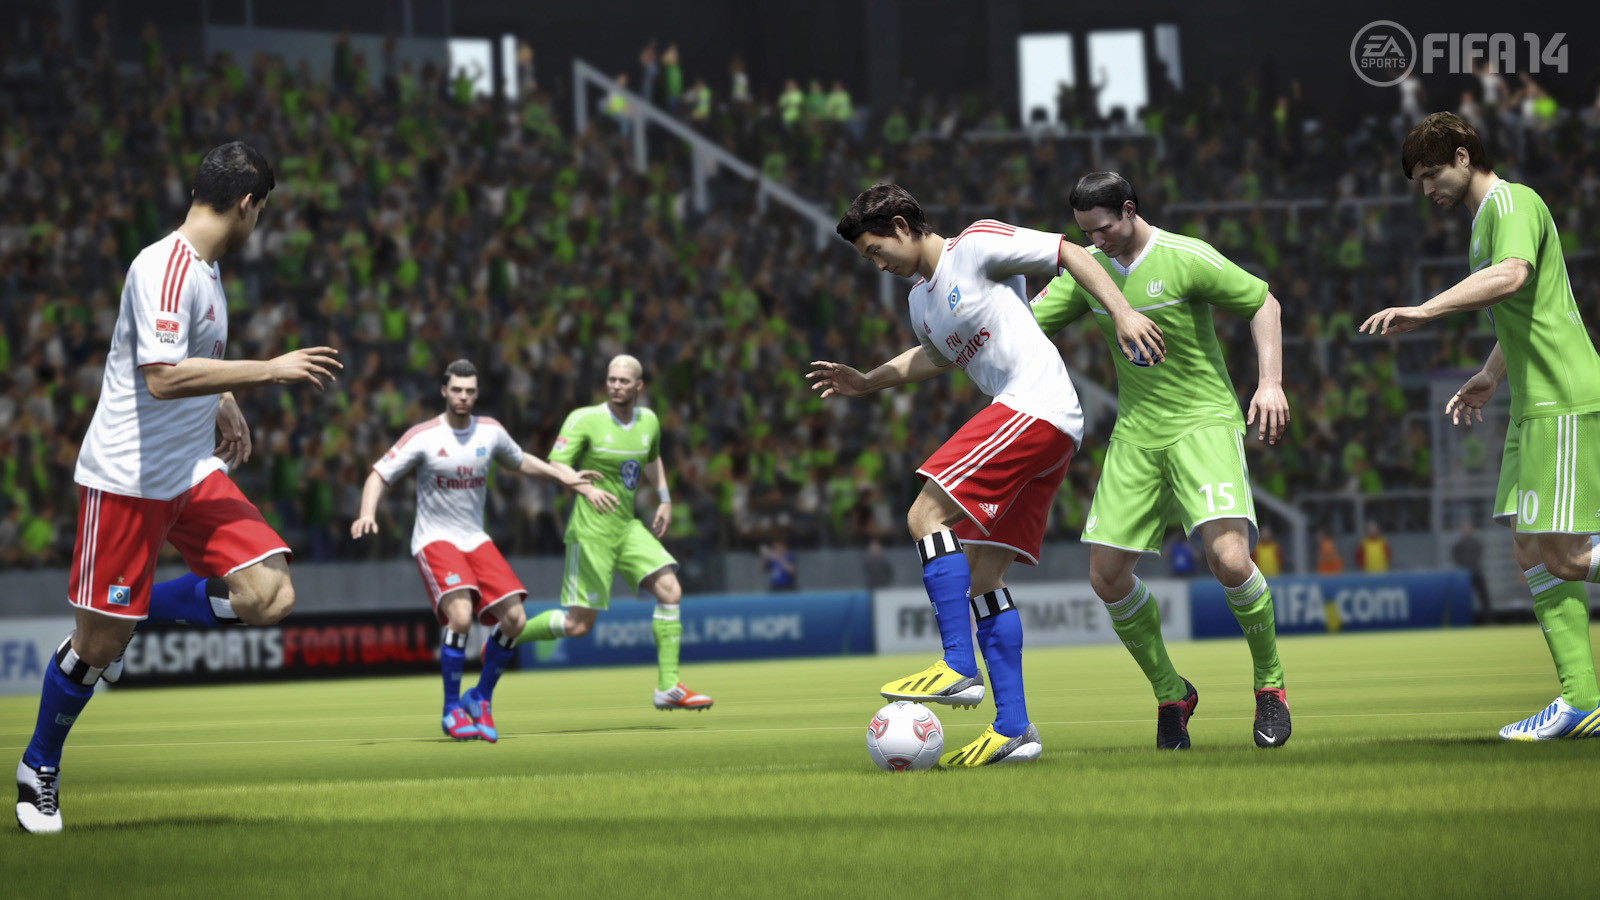 FIFA 14 coming to Wii and 3DS